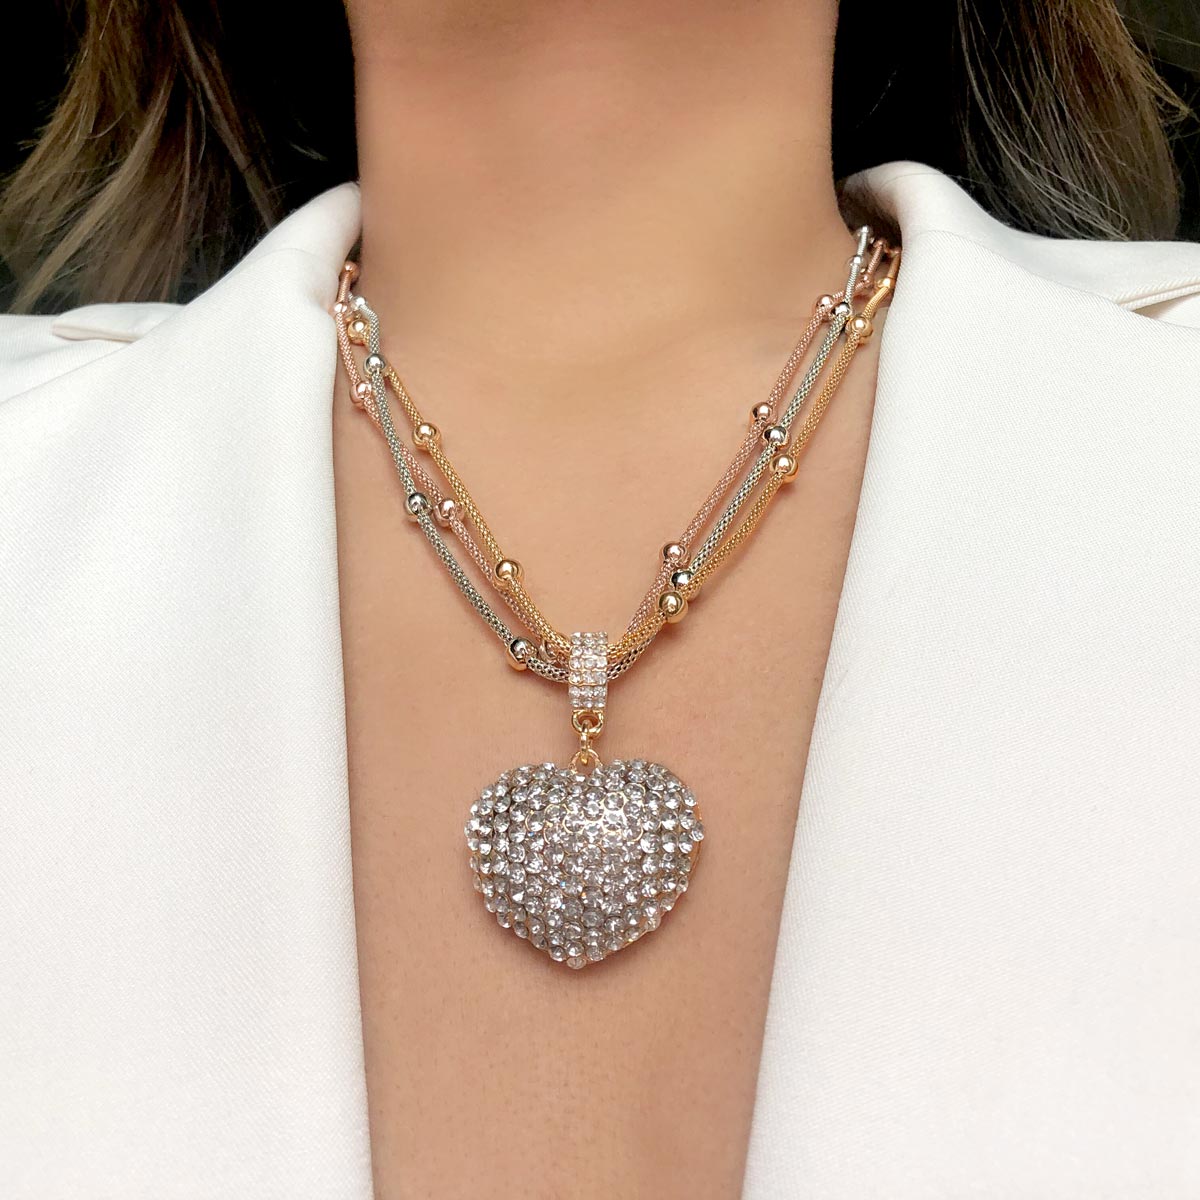 Crystal Studded Heart Pendant Necklace